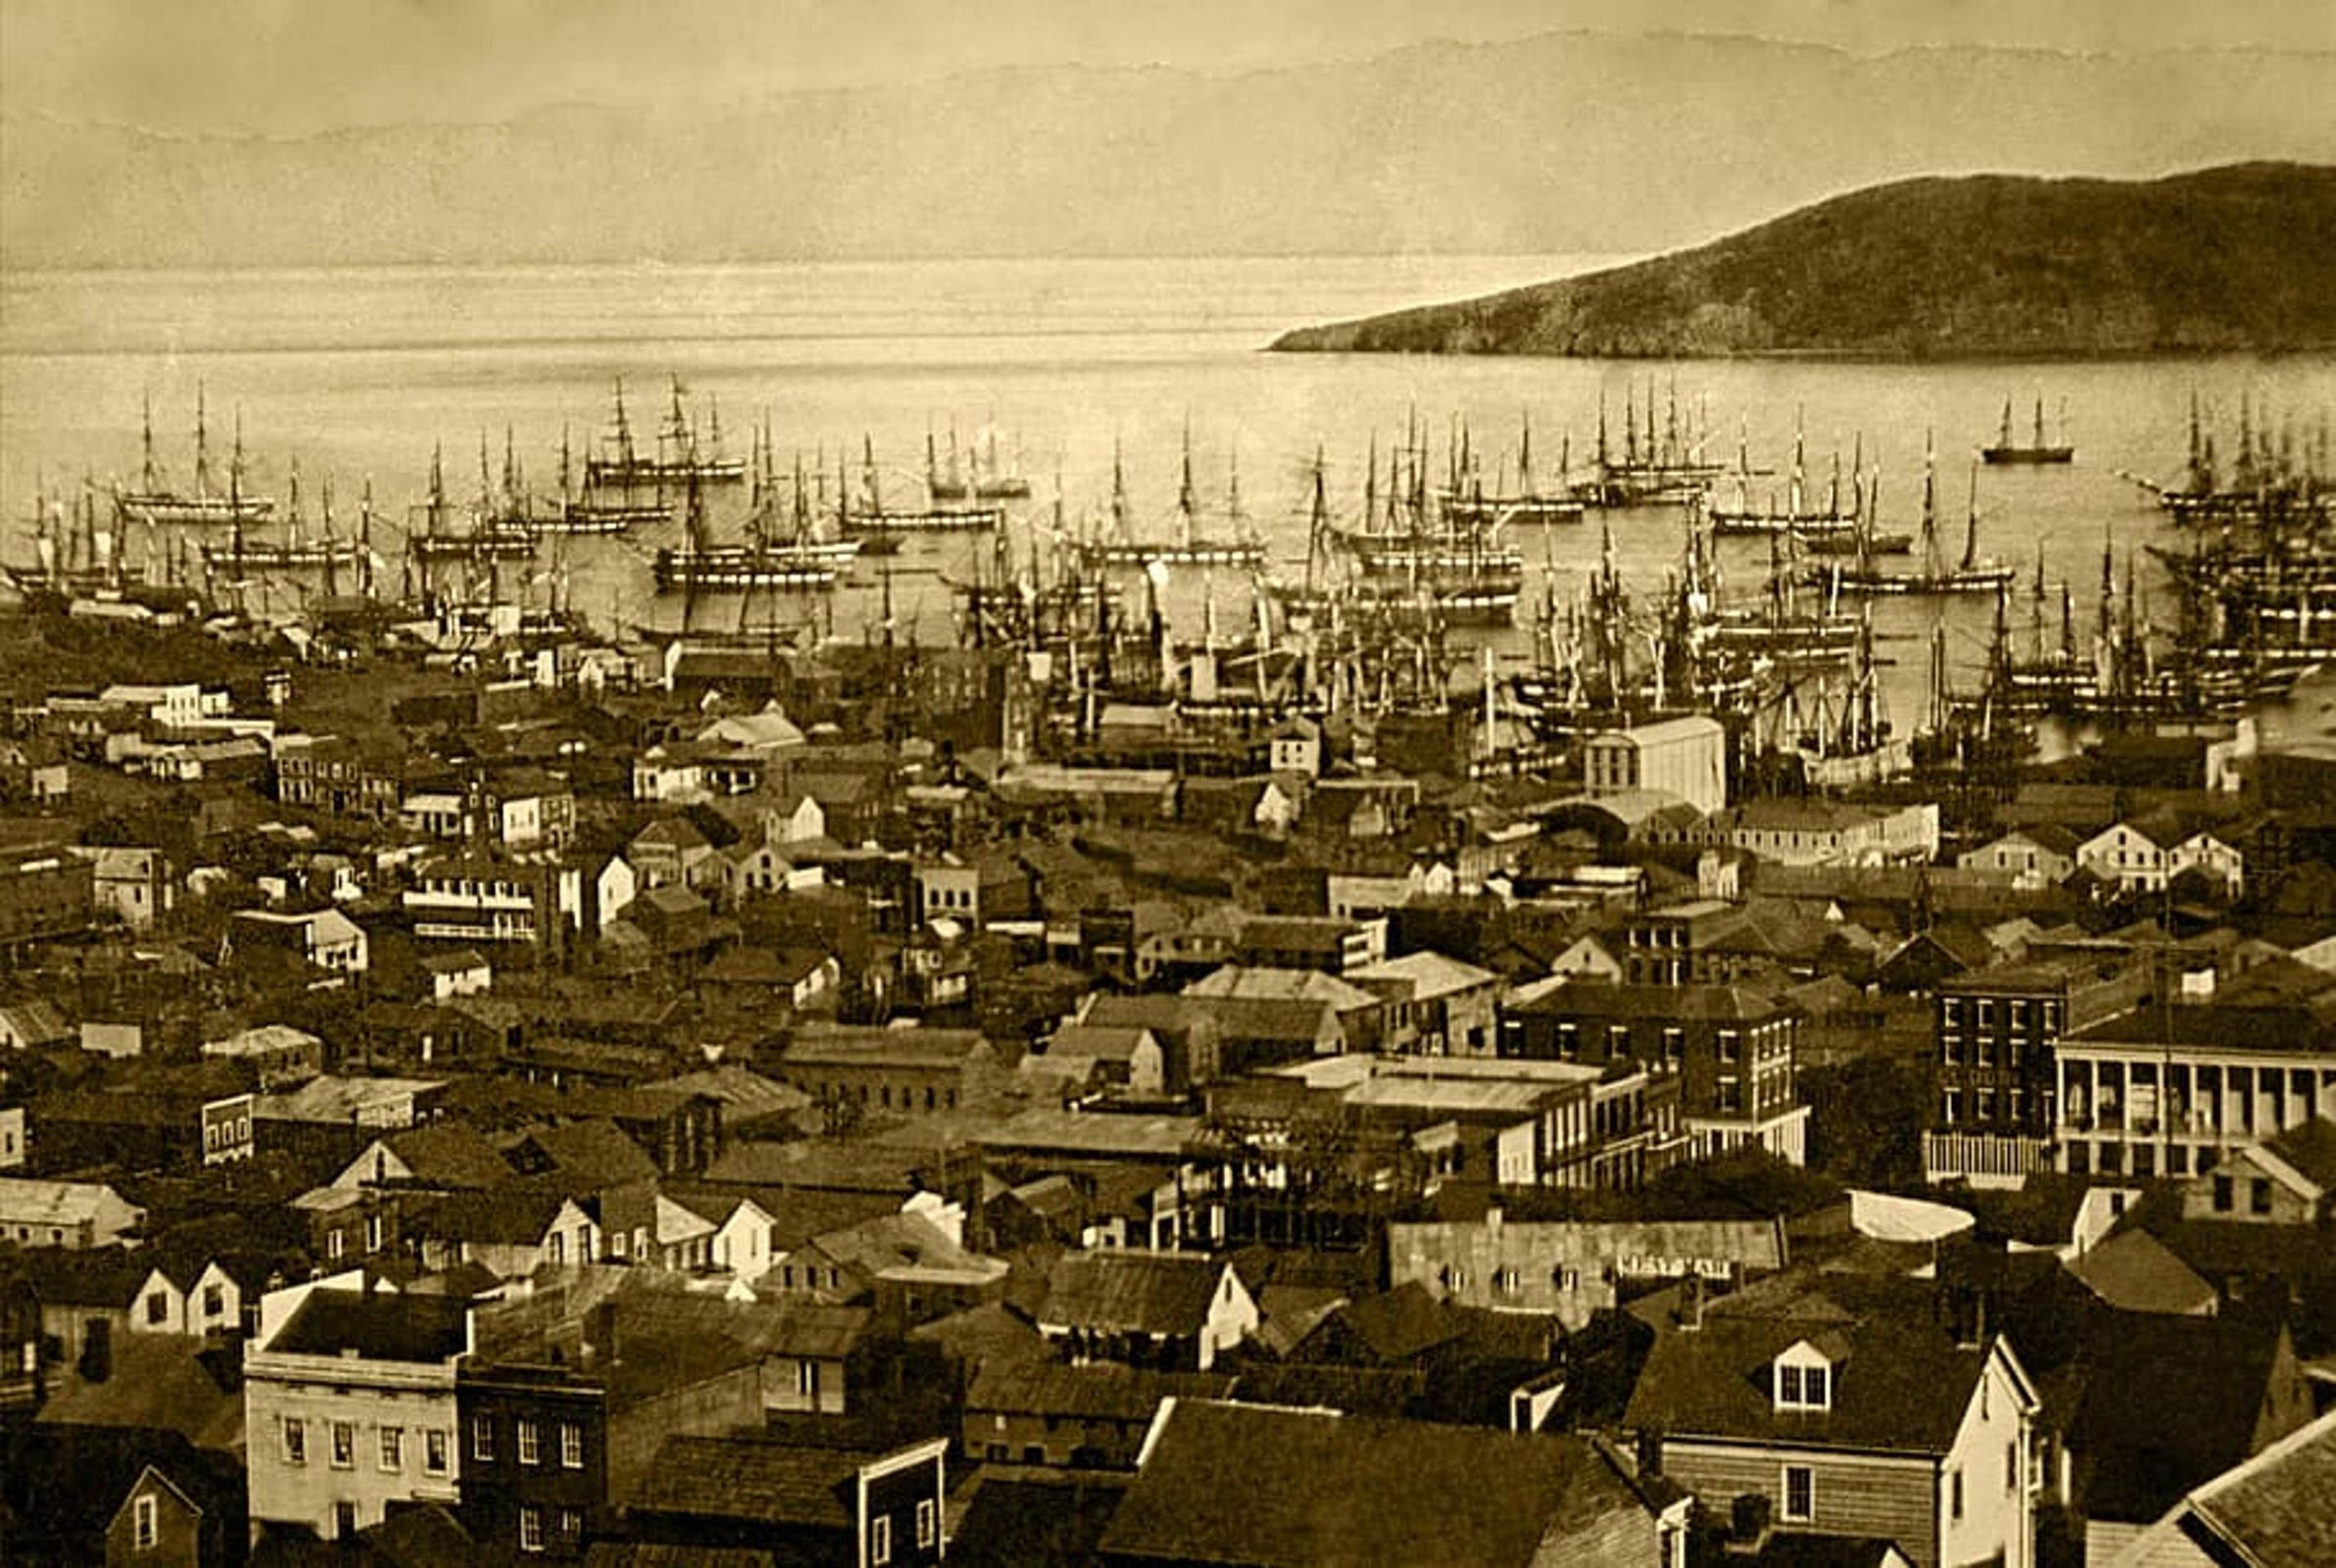 A glimpse into some of the earliest settlers, innovators, and innovations from 19th century San Francisco's "Loma Alta" down through its most notorious neighborhood.